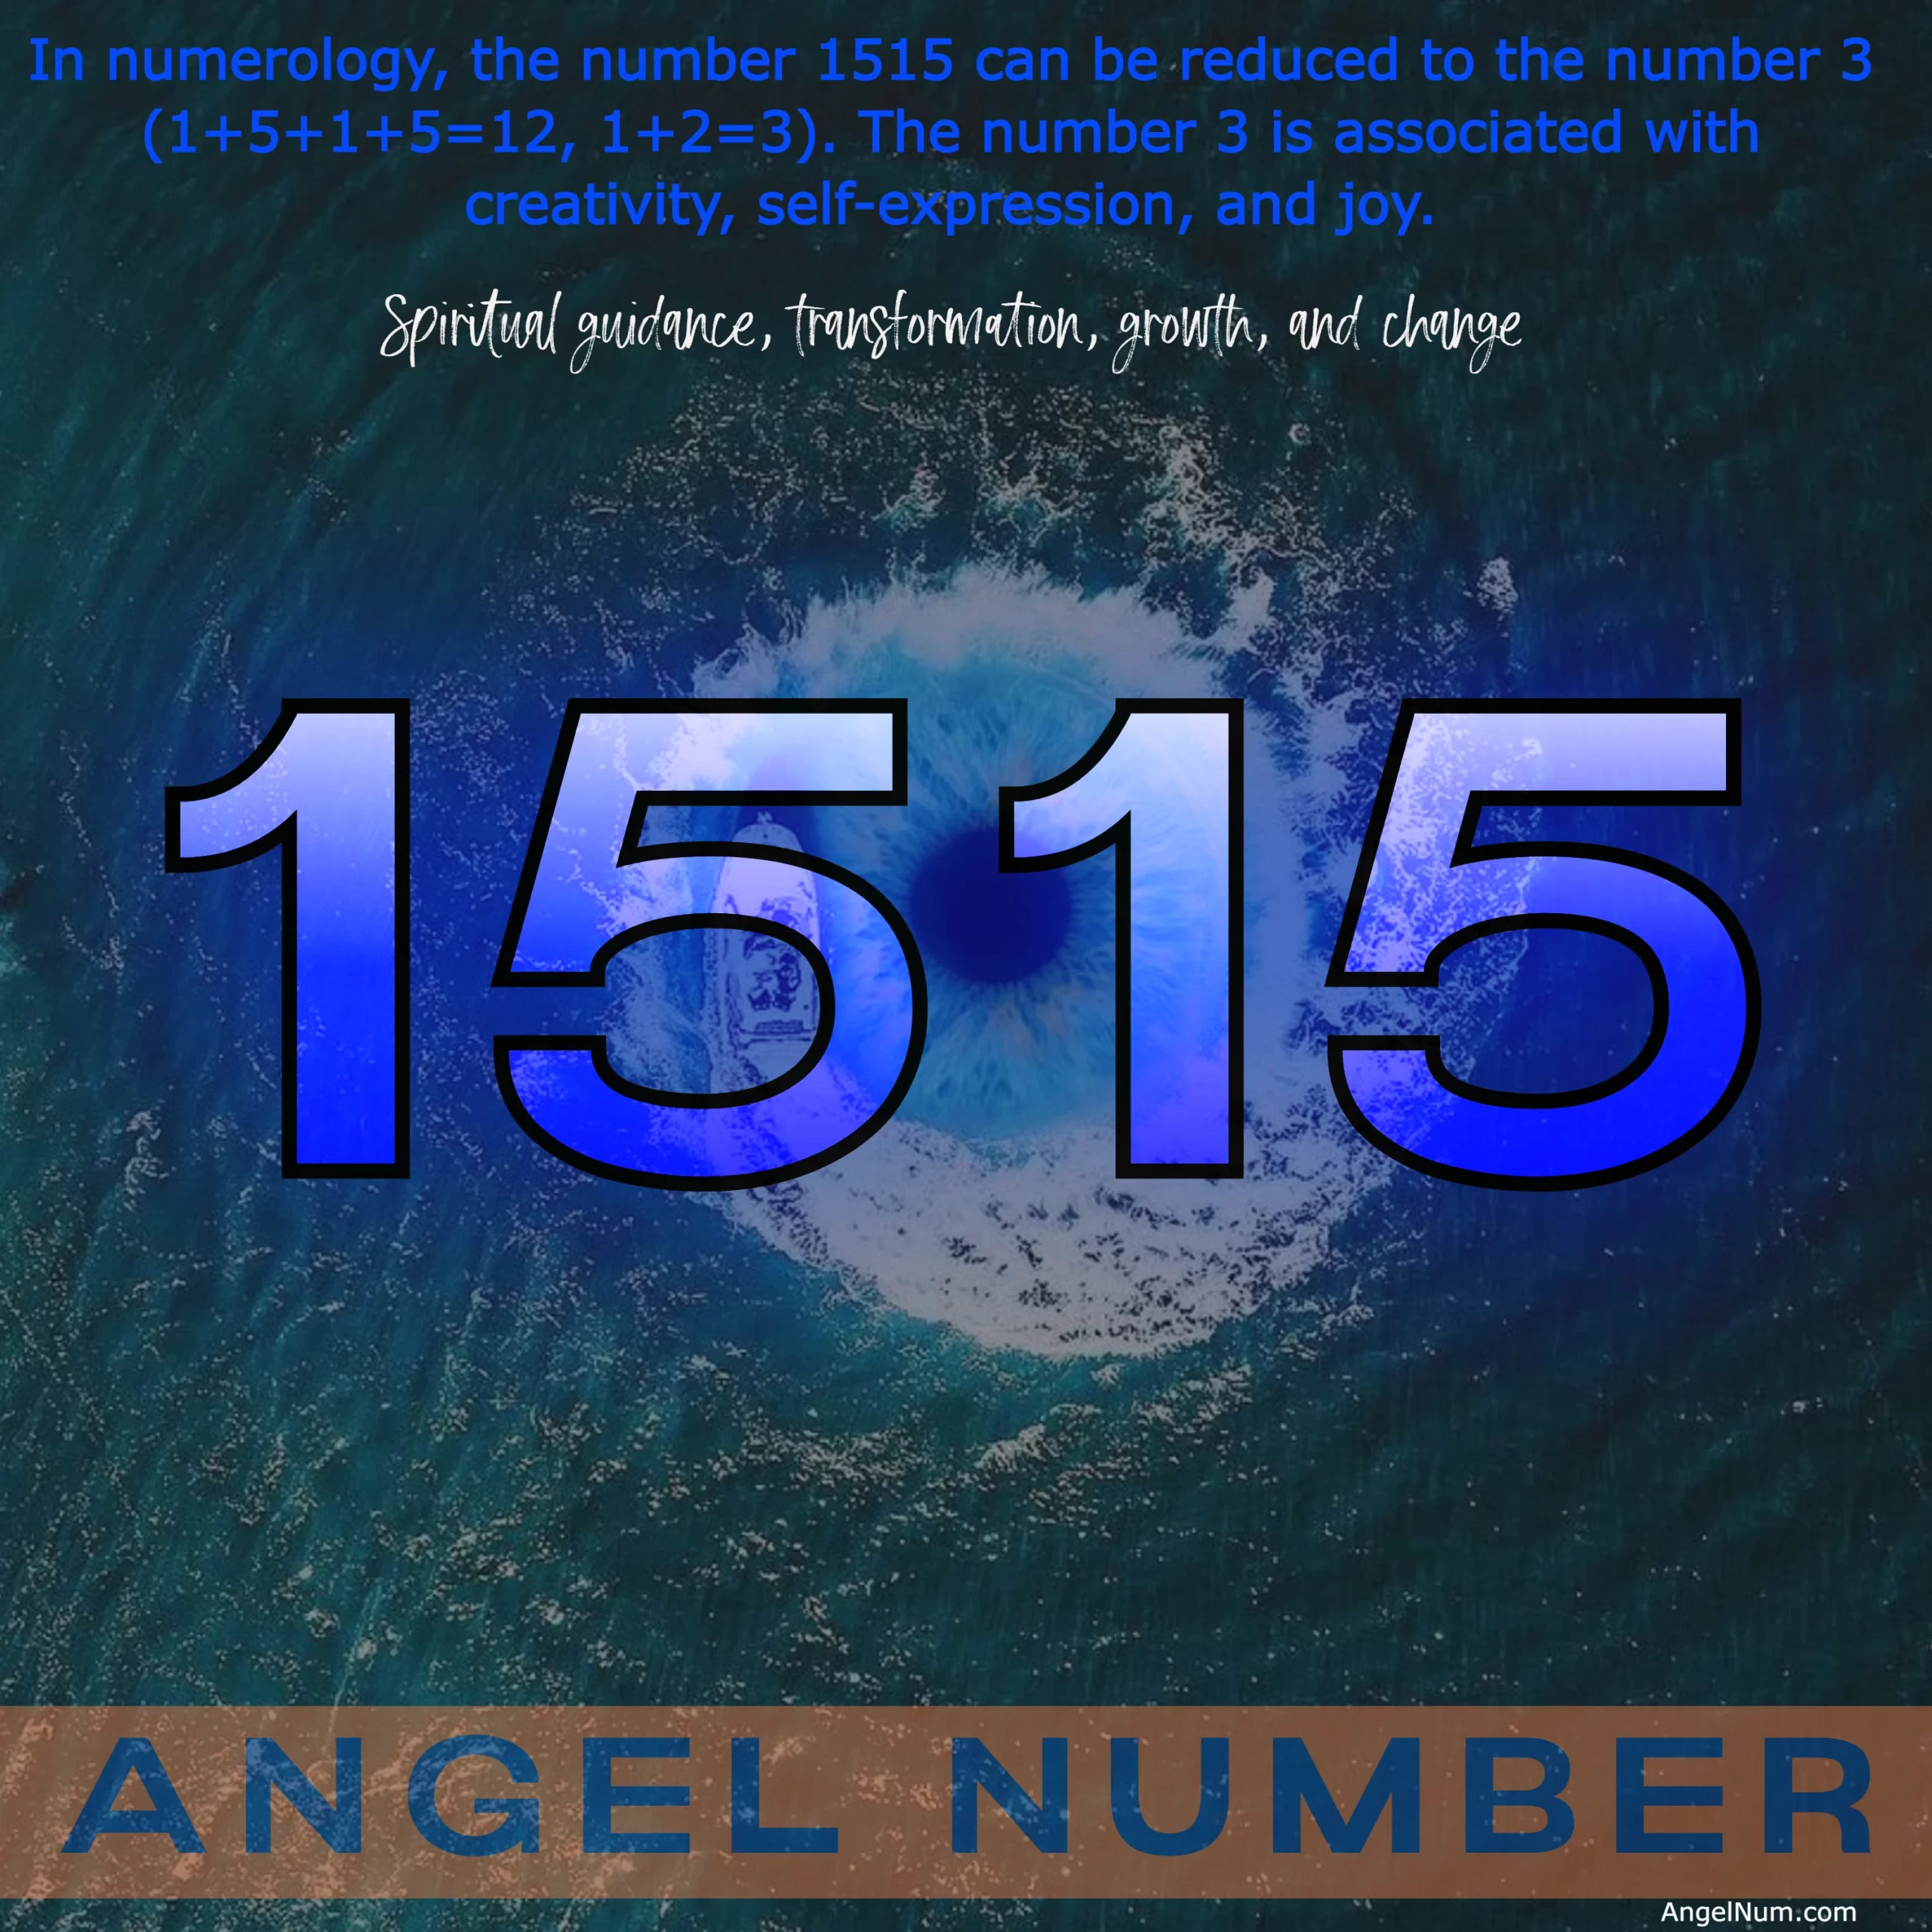 Angel Number 1515: Meaning, Symbolism, and Significance